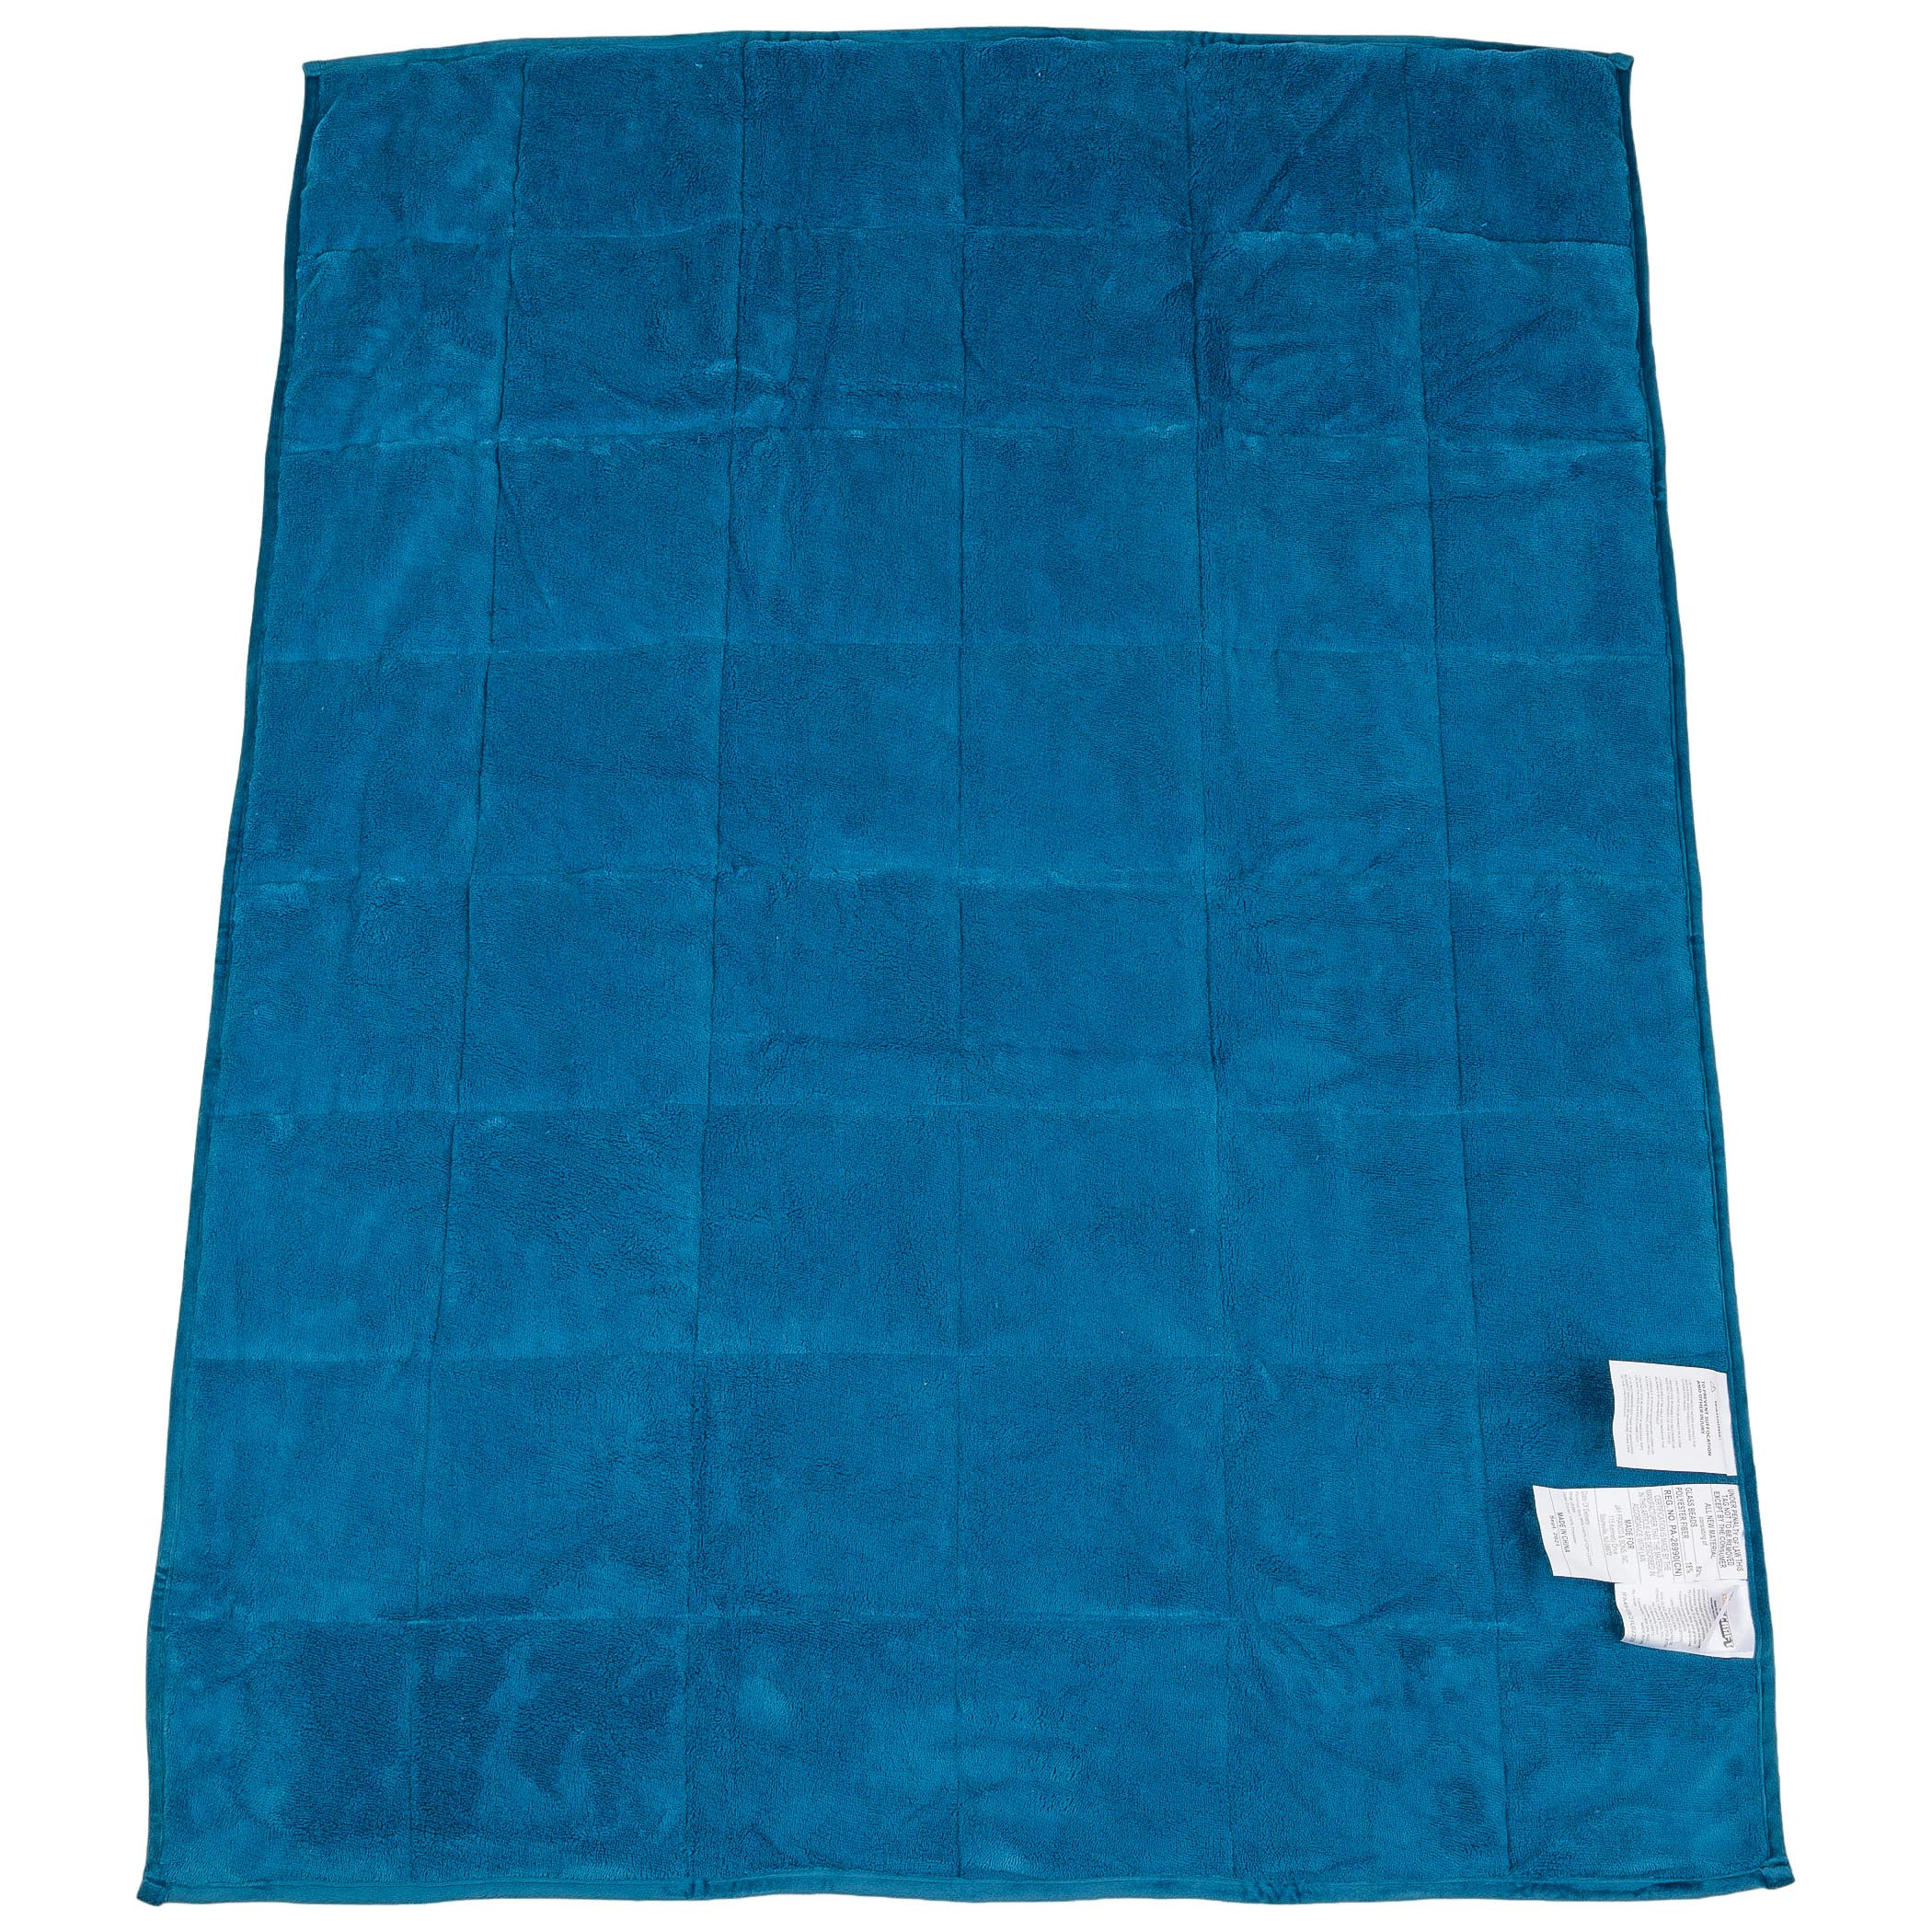 Minecraft Mob Chart Weighted Blanket